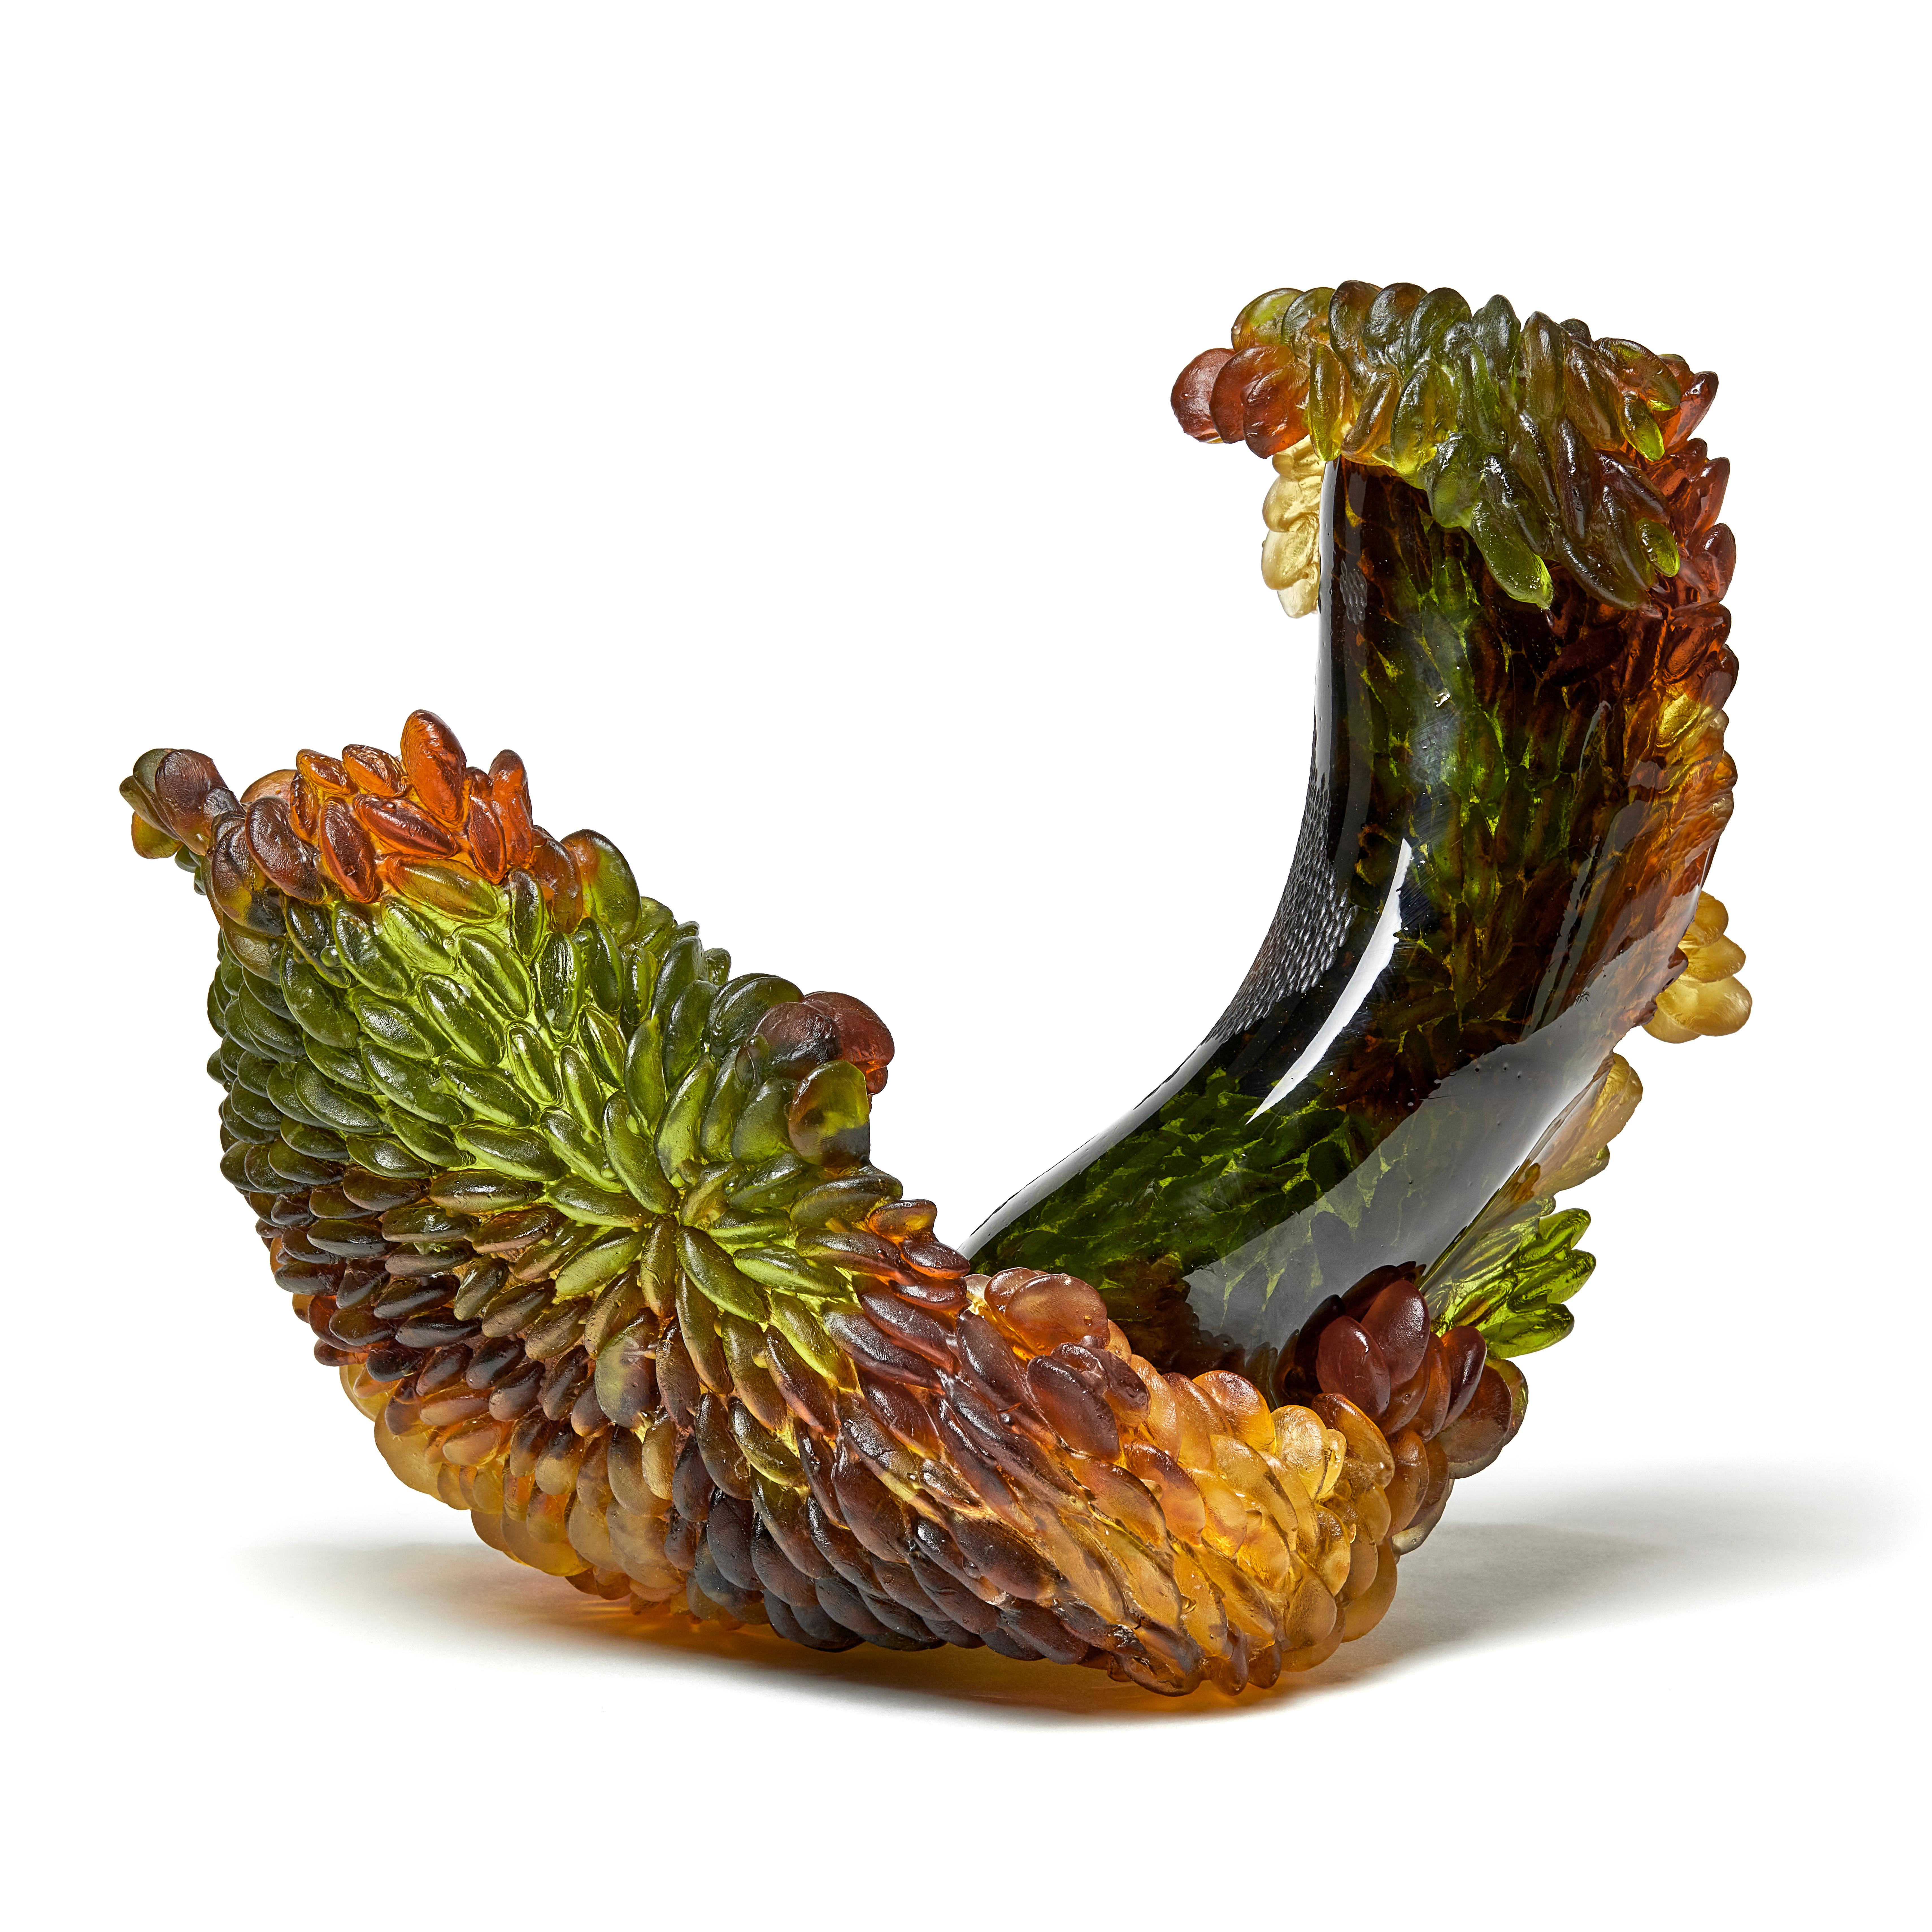 Autumn cherry is a unique textured glass sculpture in olive green, amber, rich brown and gold by the British artist Nina Casson McGarva. 

Casson McGarva firstly casts her glass in a flat mould where she introduces all of the beautifully detailed,